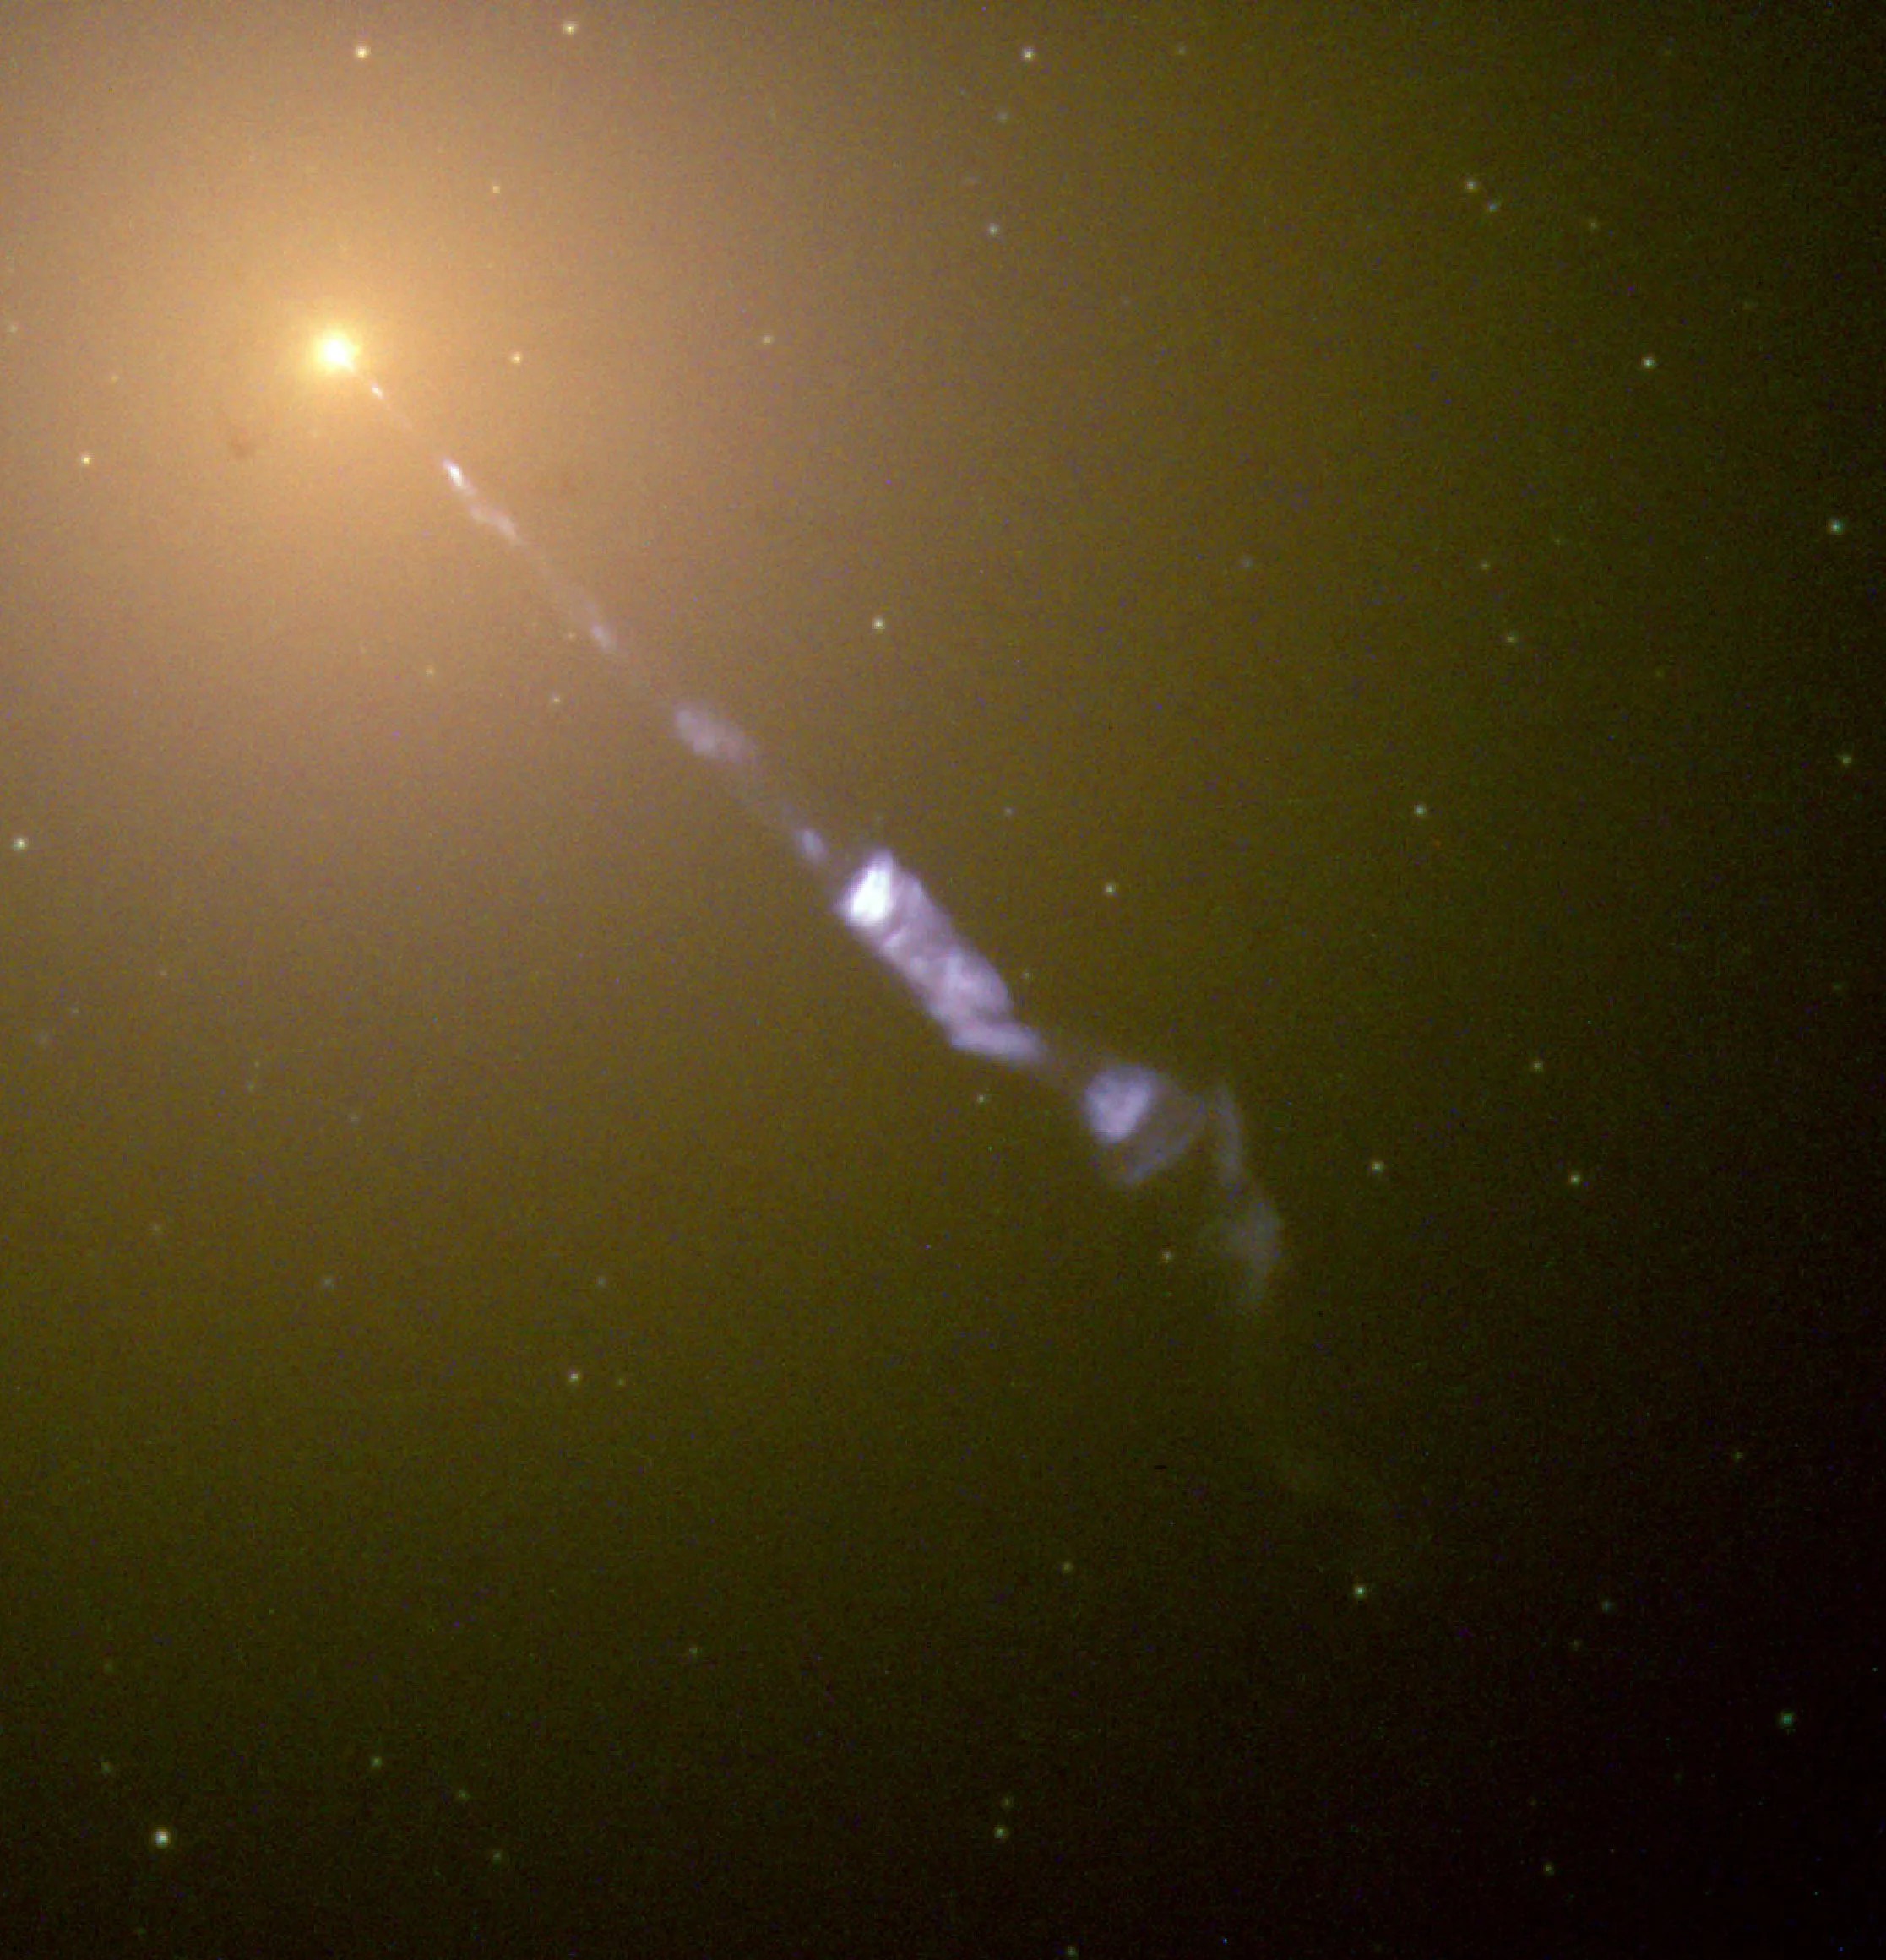 This close-up image shows a jet of material ejecting down and to the lower left corner from a bright, orange-ish galaxy core.